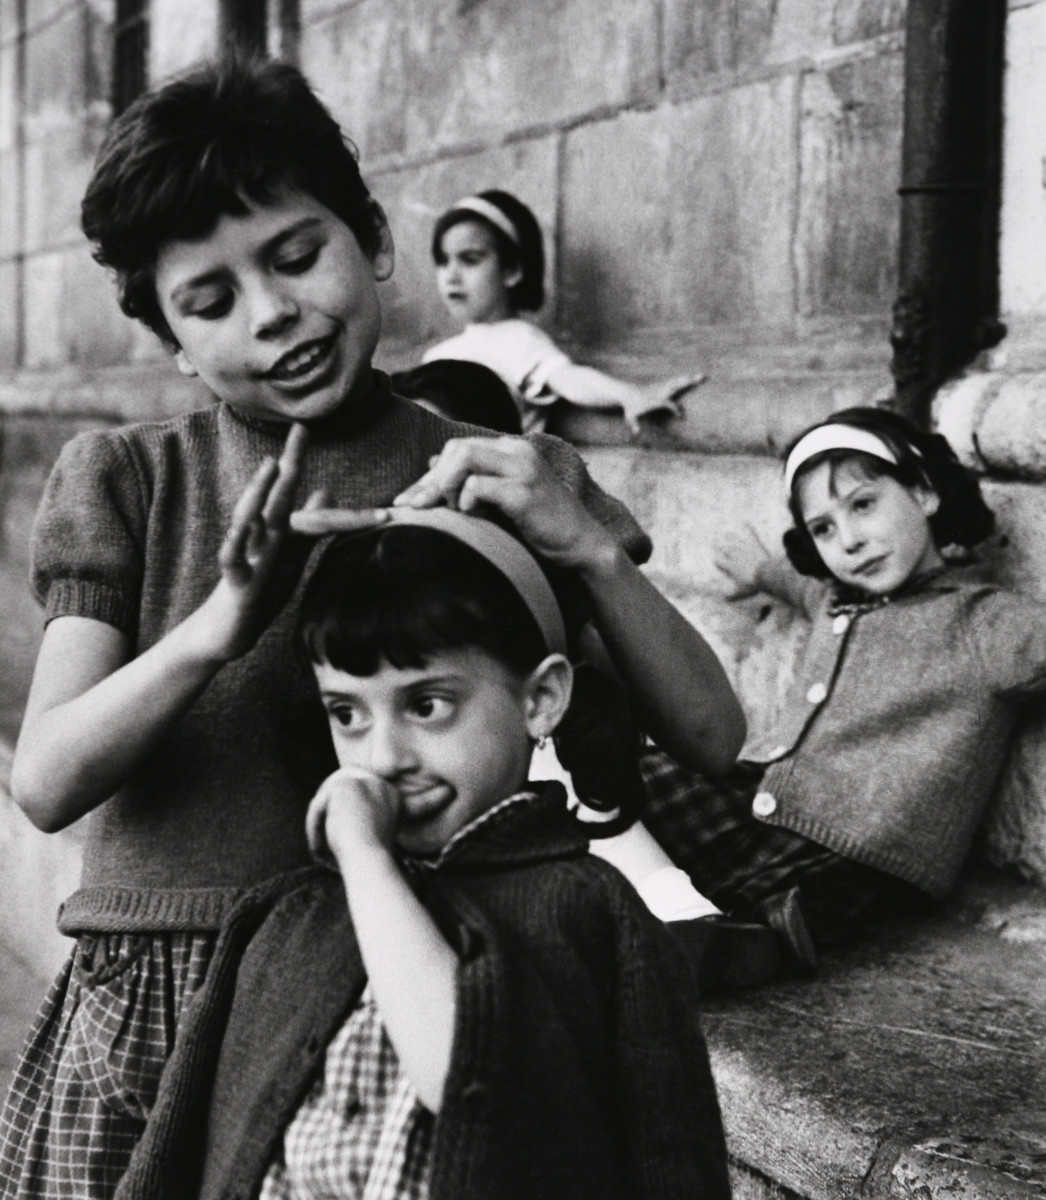 Oviedo, Spain 1962 by Edward R. Miller  Image: Four white children by a stone wall- one fixing another's hair